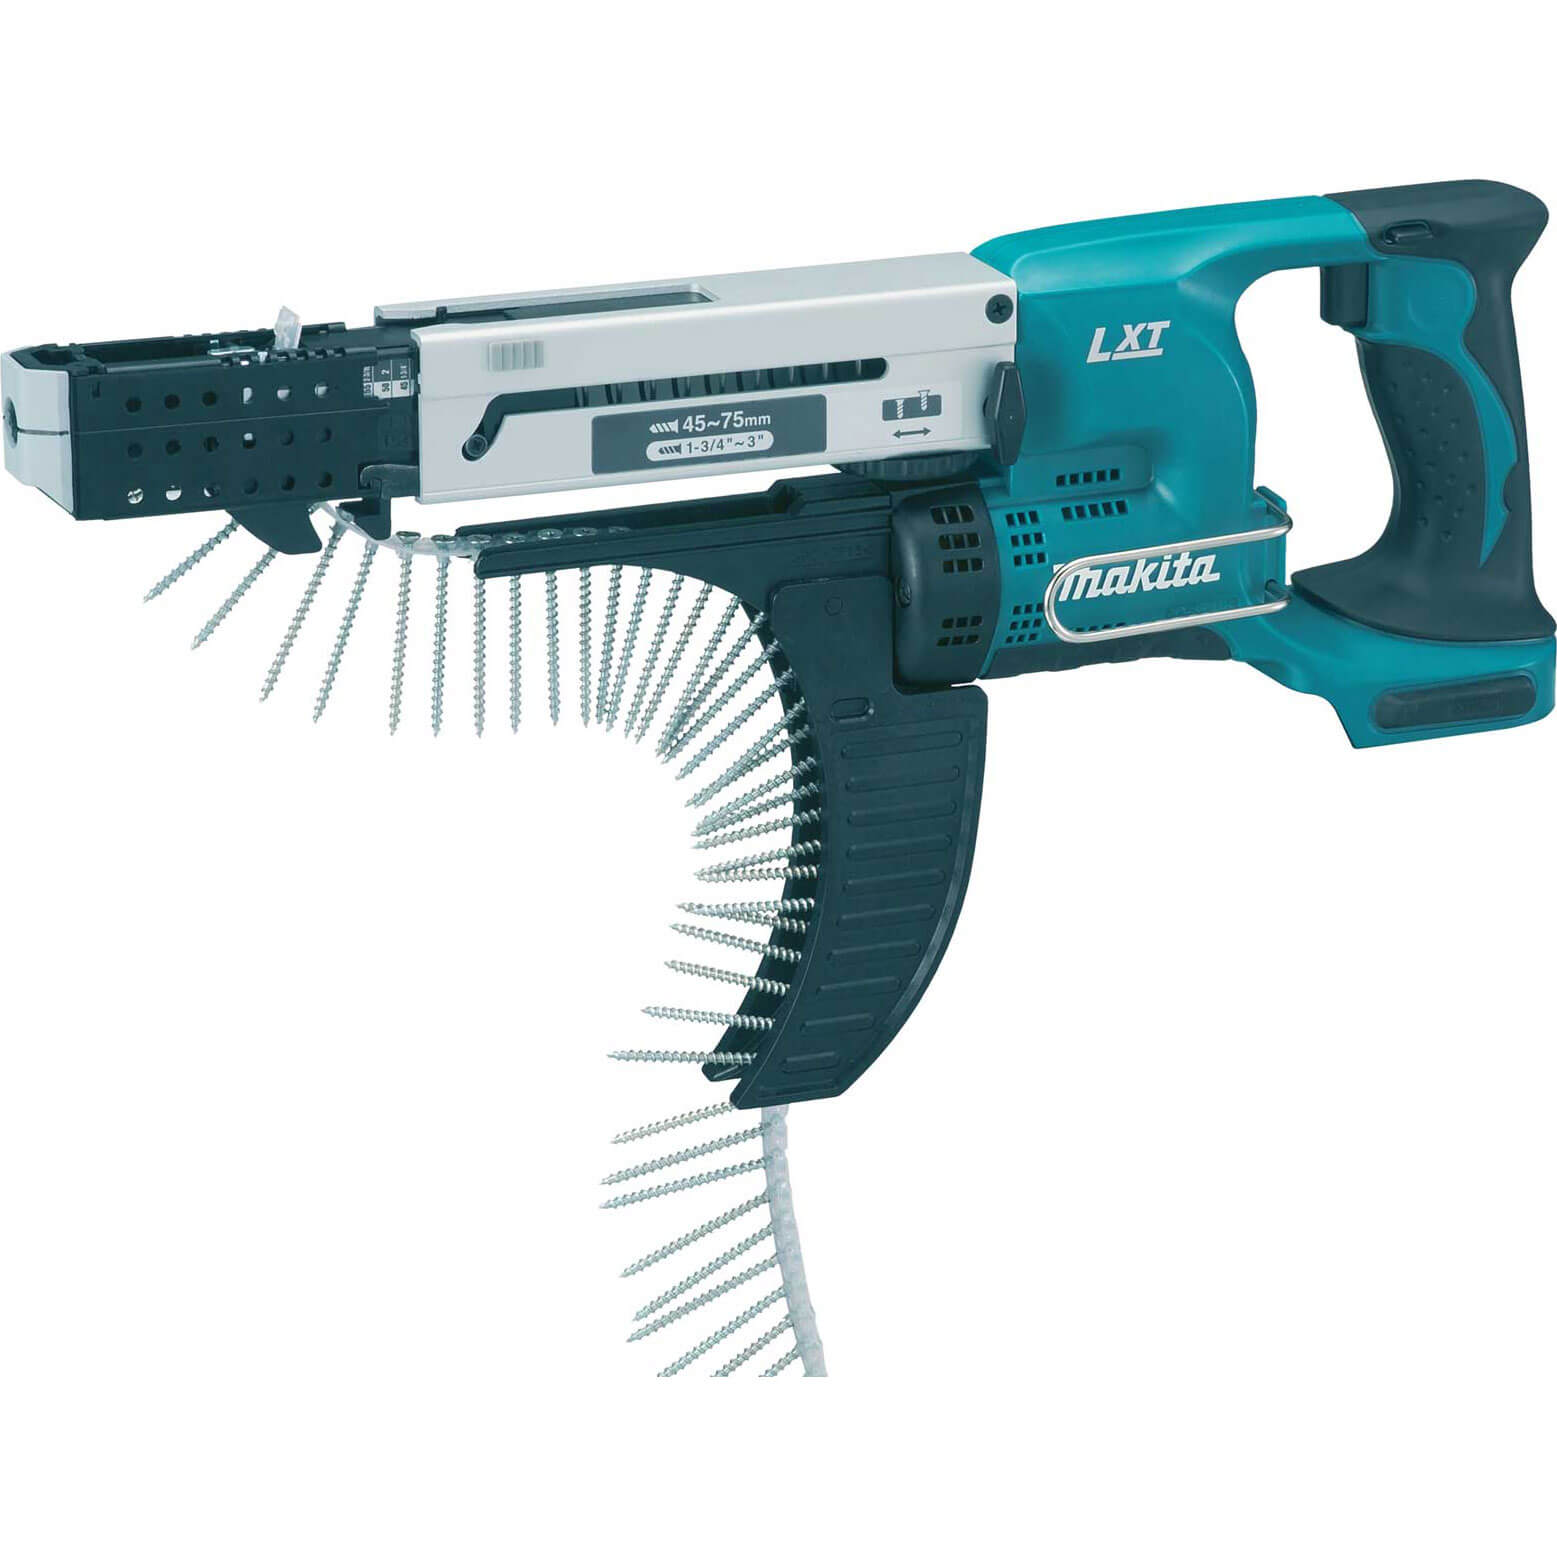 Image of Makita DFR750 18v LXT Cordless Auto Feed Screwdriver No Batteries No Charger No Case